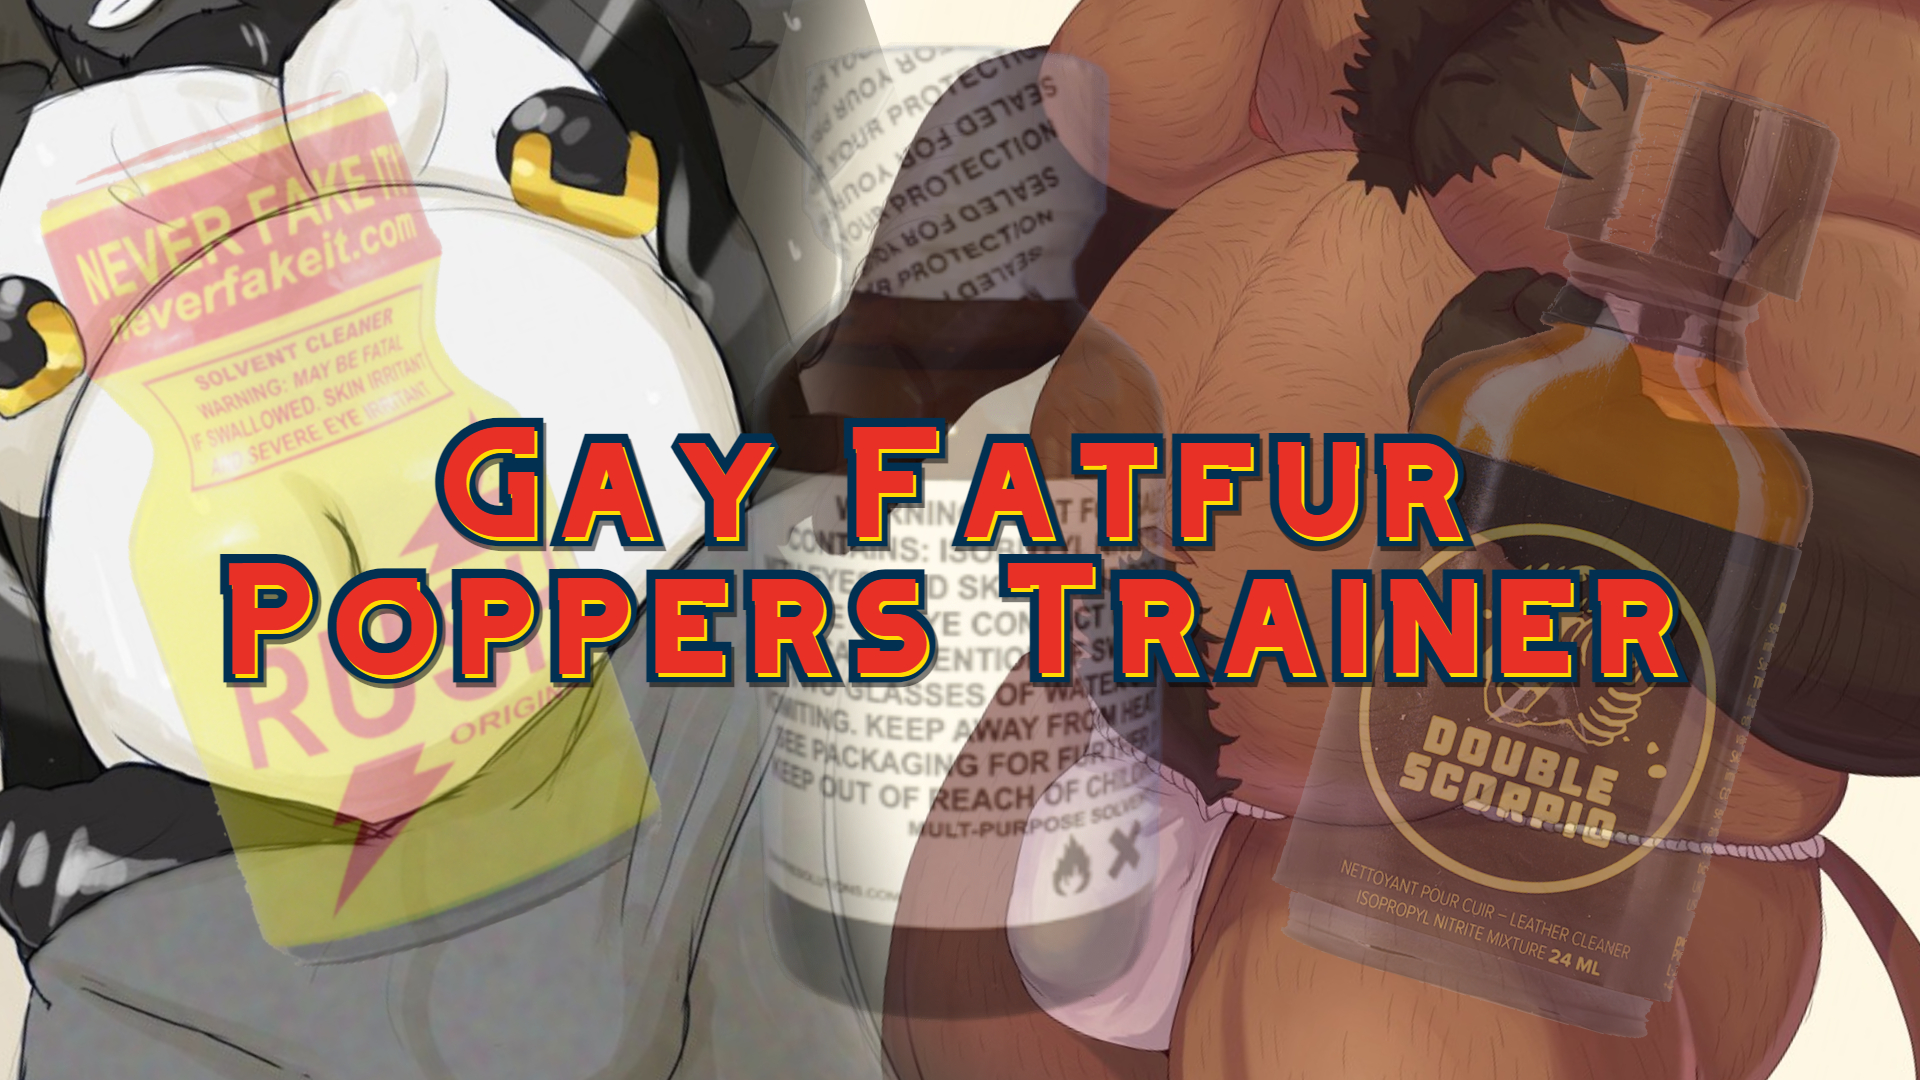 Gay Fat Furry Poppers Trainer